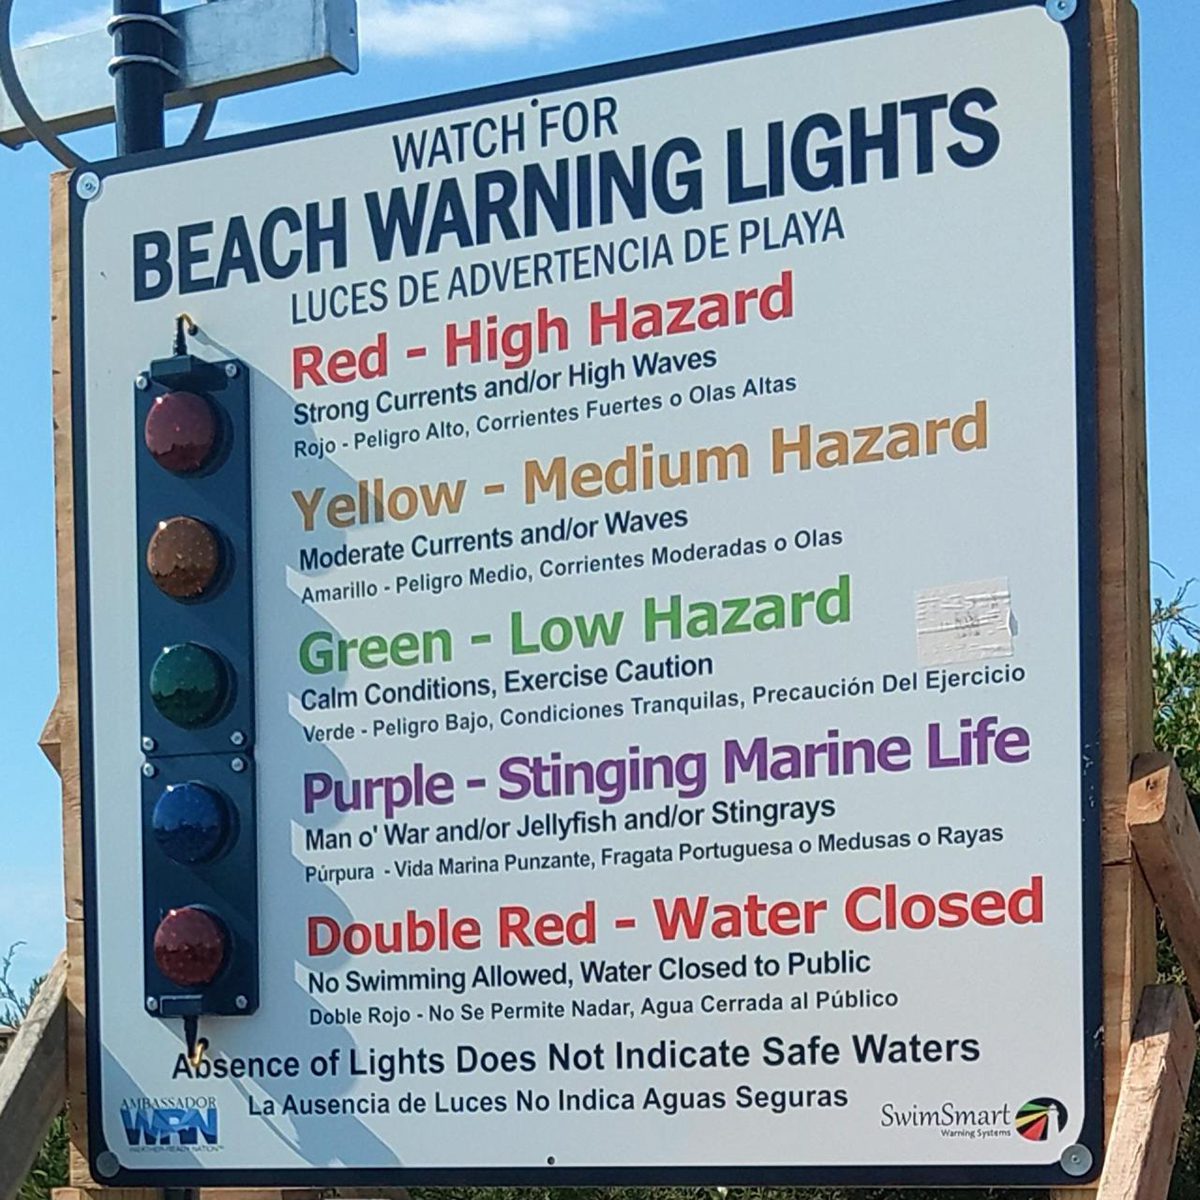 The beach warning signs were to be activated Wednesday. Photo: Oak Island 